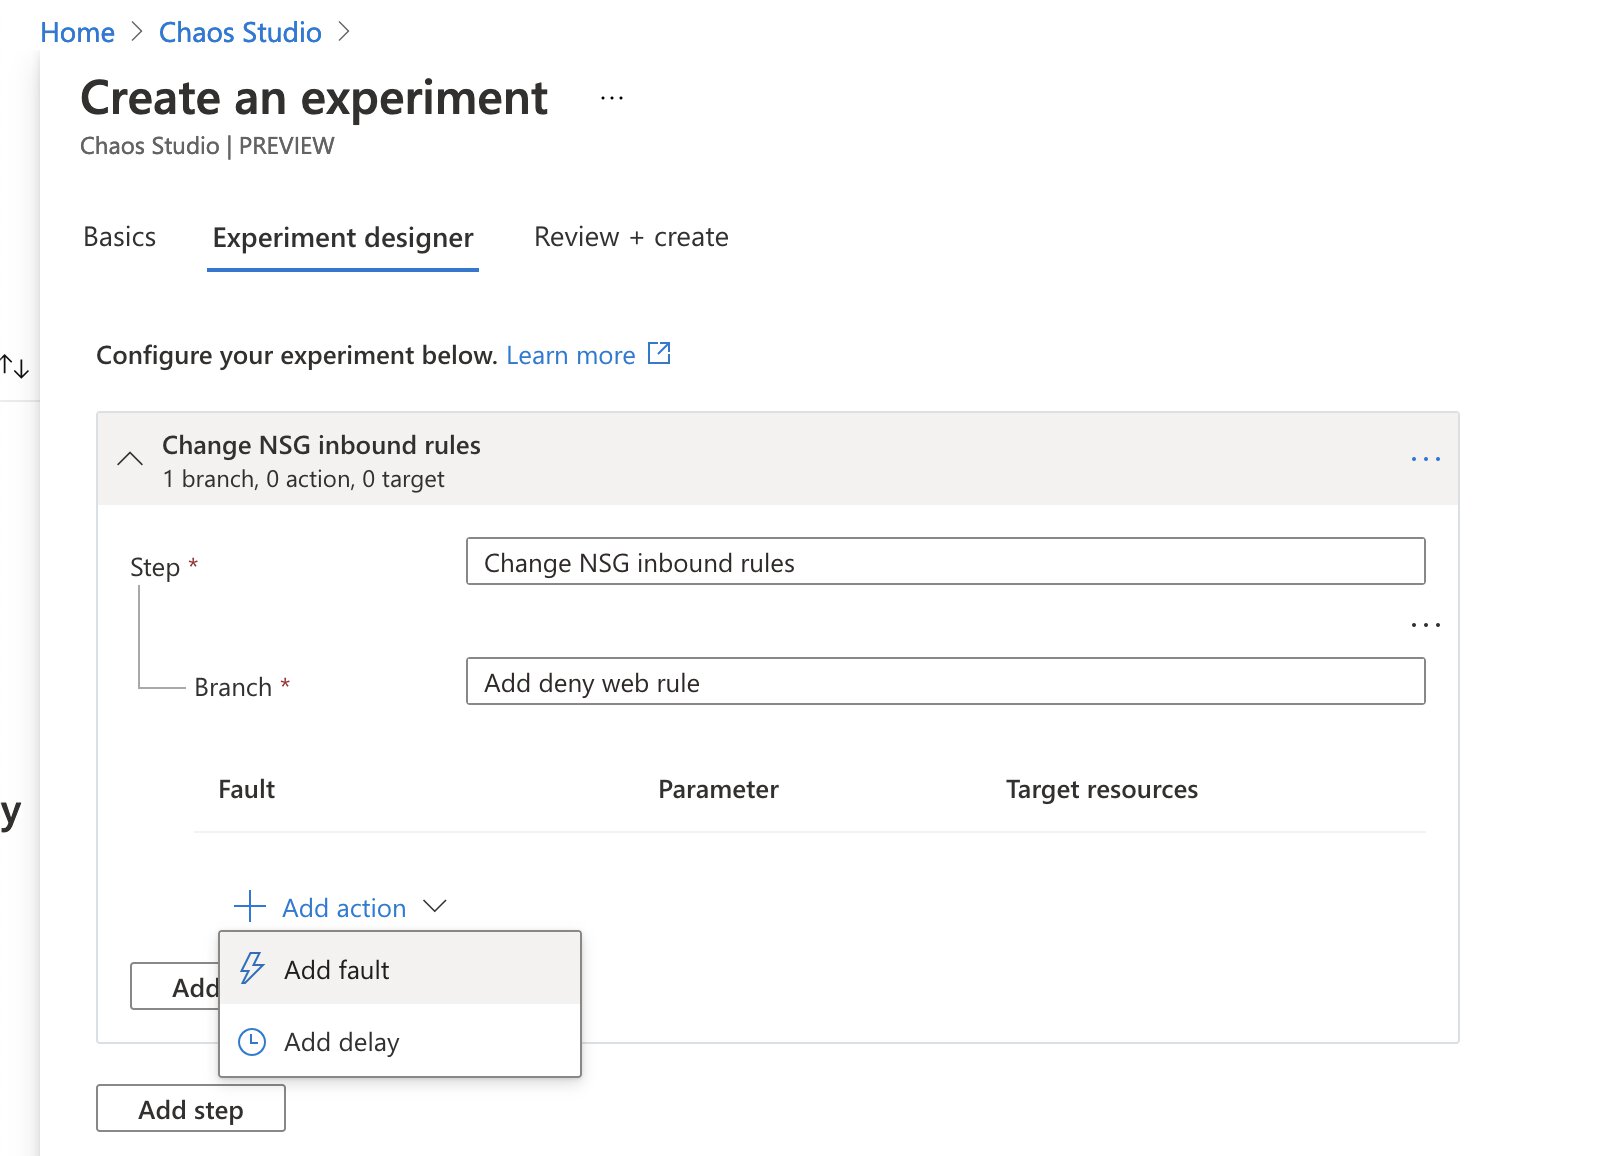 Image of the the Chaos Studio user interface showing the create experiment screen&rsquo;s experiment designer tab. It has a single step called &ldquo;change NSG inbound rules&rdquo;, with a single branch &ldquo;Add deny web rule&rdquo;.